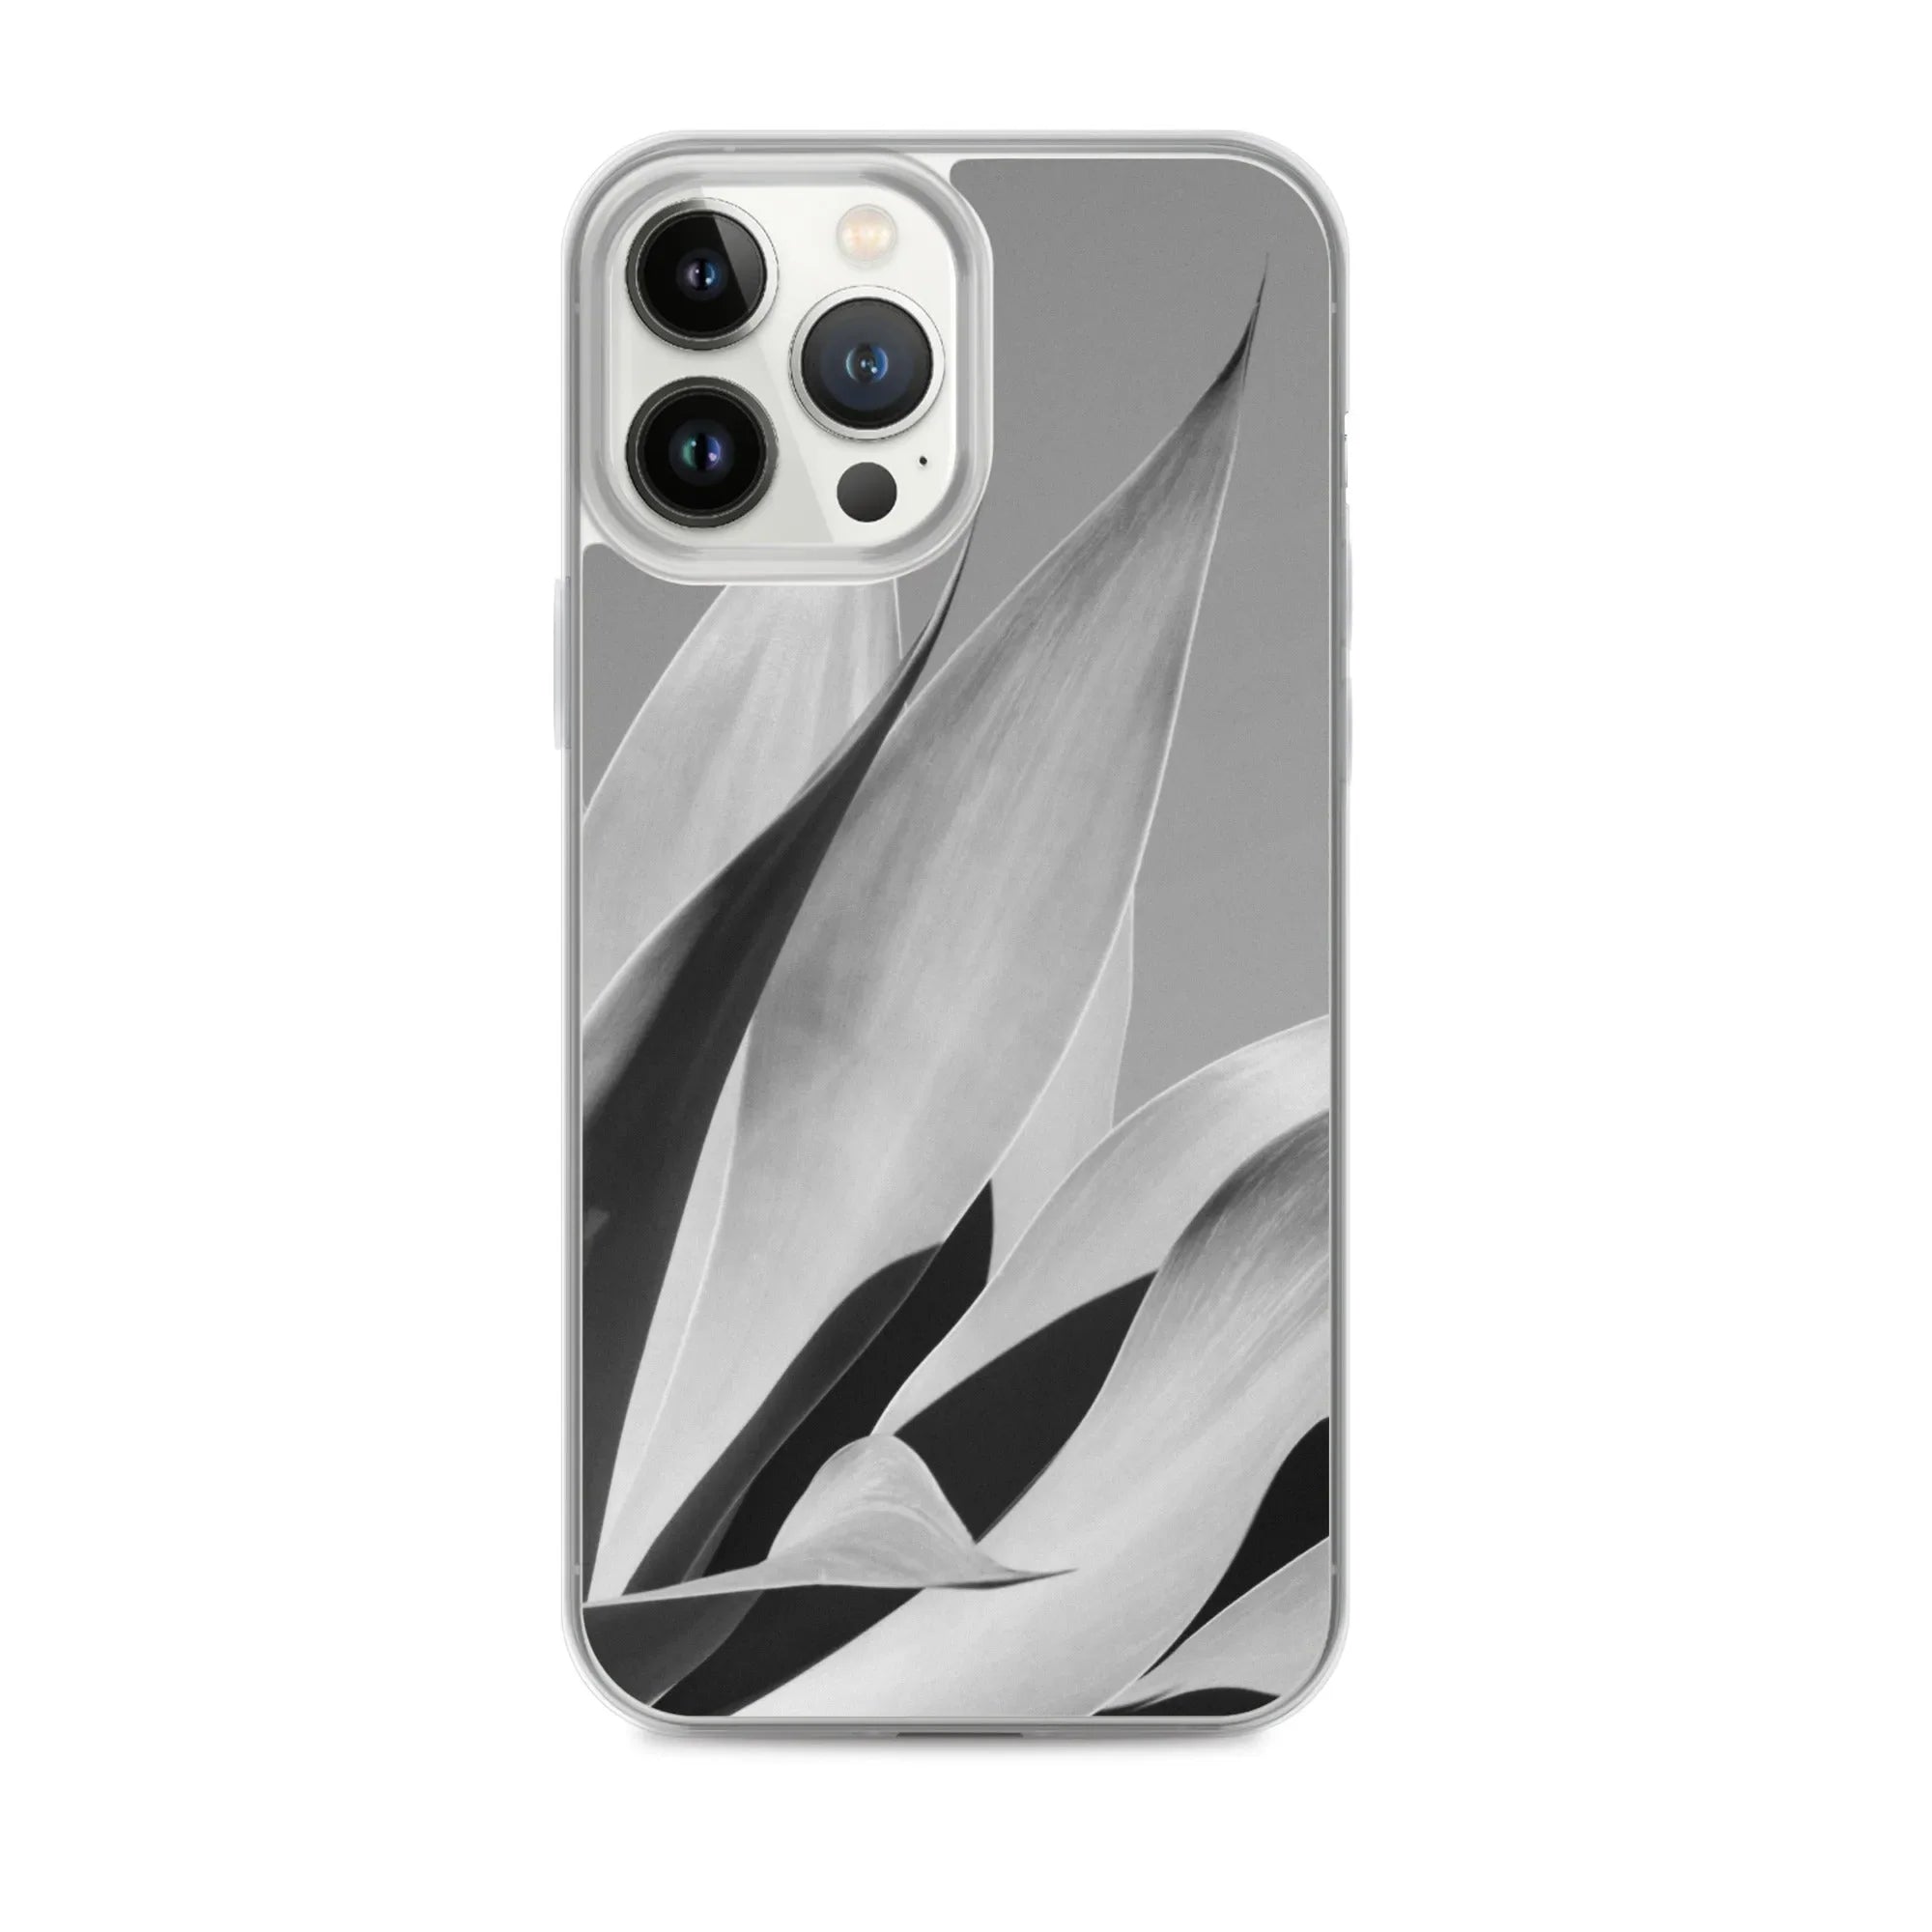 In Bloom Botanical Art Iphone Case - Black And White - Iphone 13 Pro Max - Mobile Phone Cases - Aesthetic Art